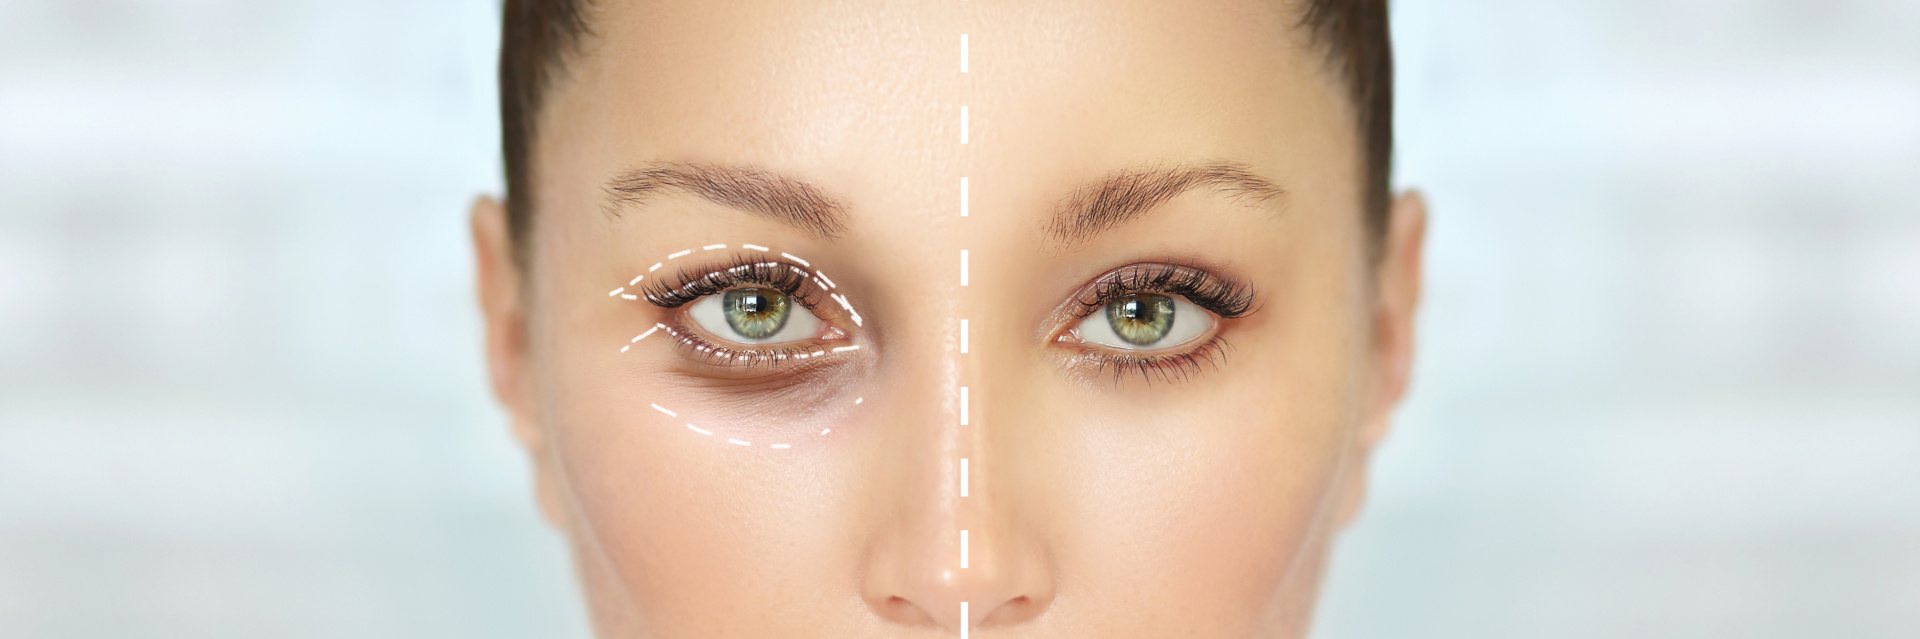 Seven detailed facts about eyelid surgery at MediEsté Clinic